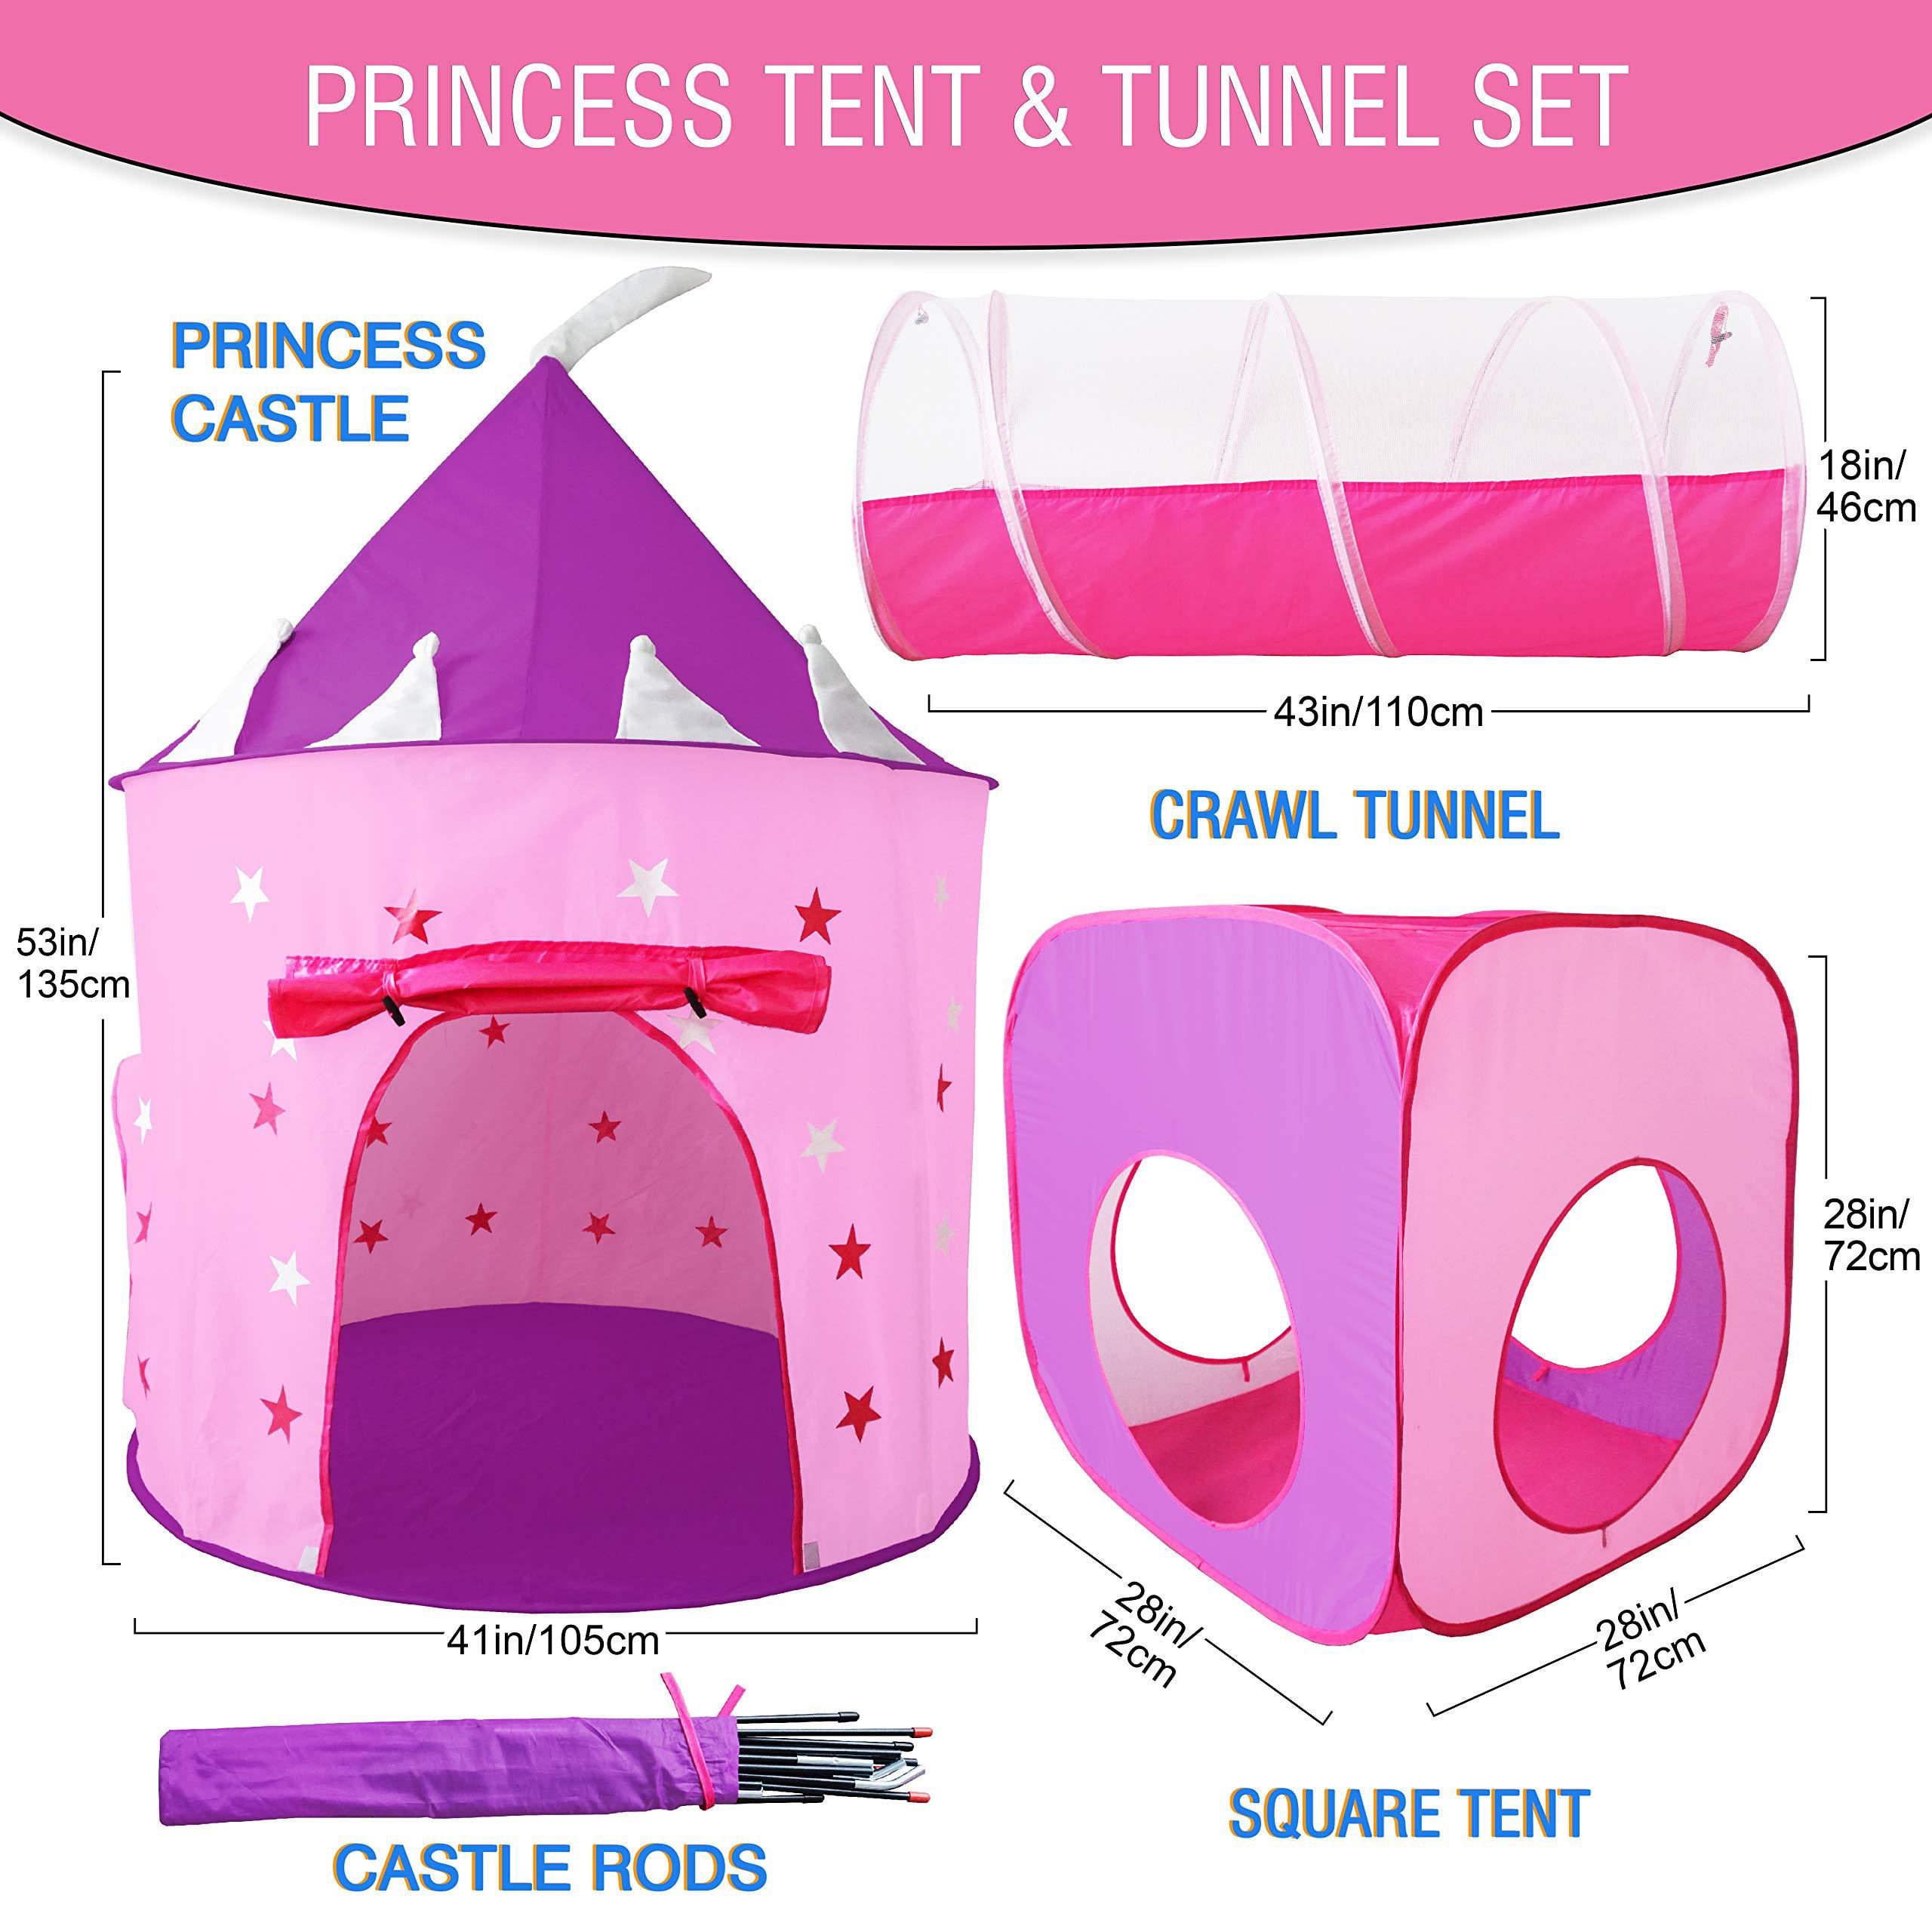 Gift Girls Princess Tent With Tunnel Kids Castle Playhouse & Dress up Pop 2 for sale online 